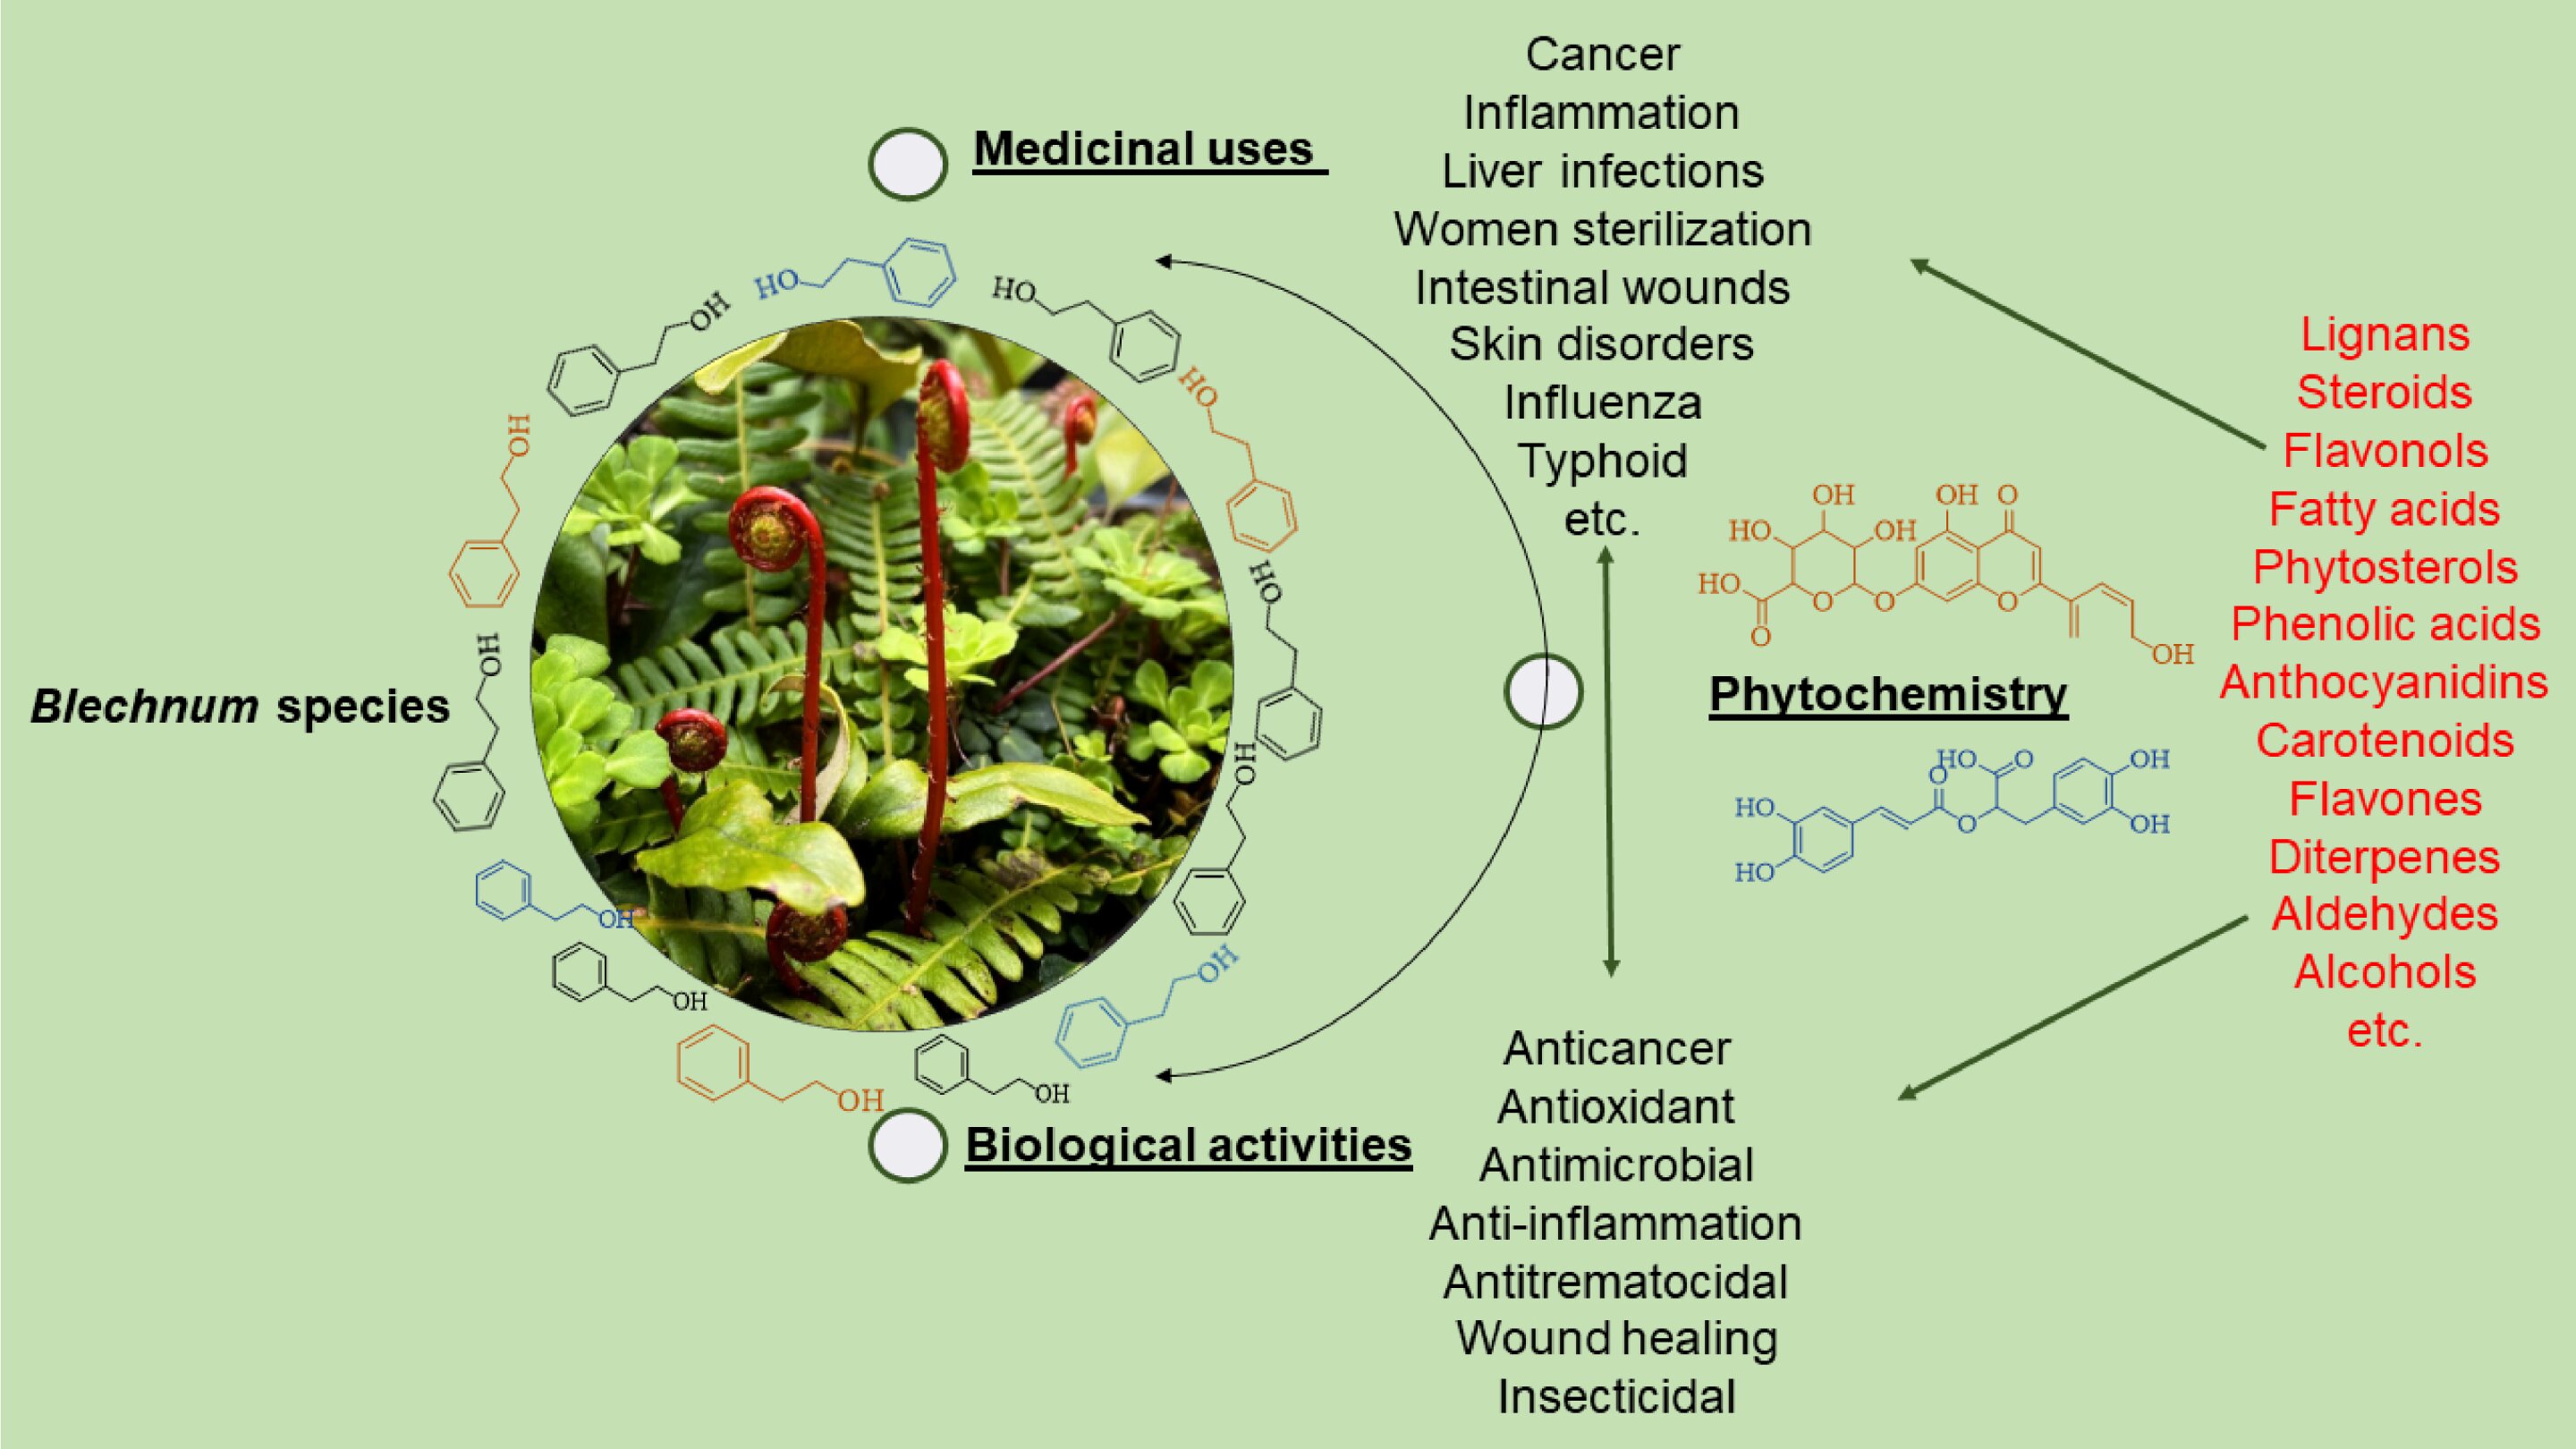 Researchers review uses, phytochemistry and pharmacological properties of genus Blechnum